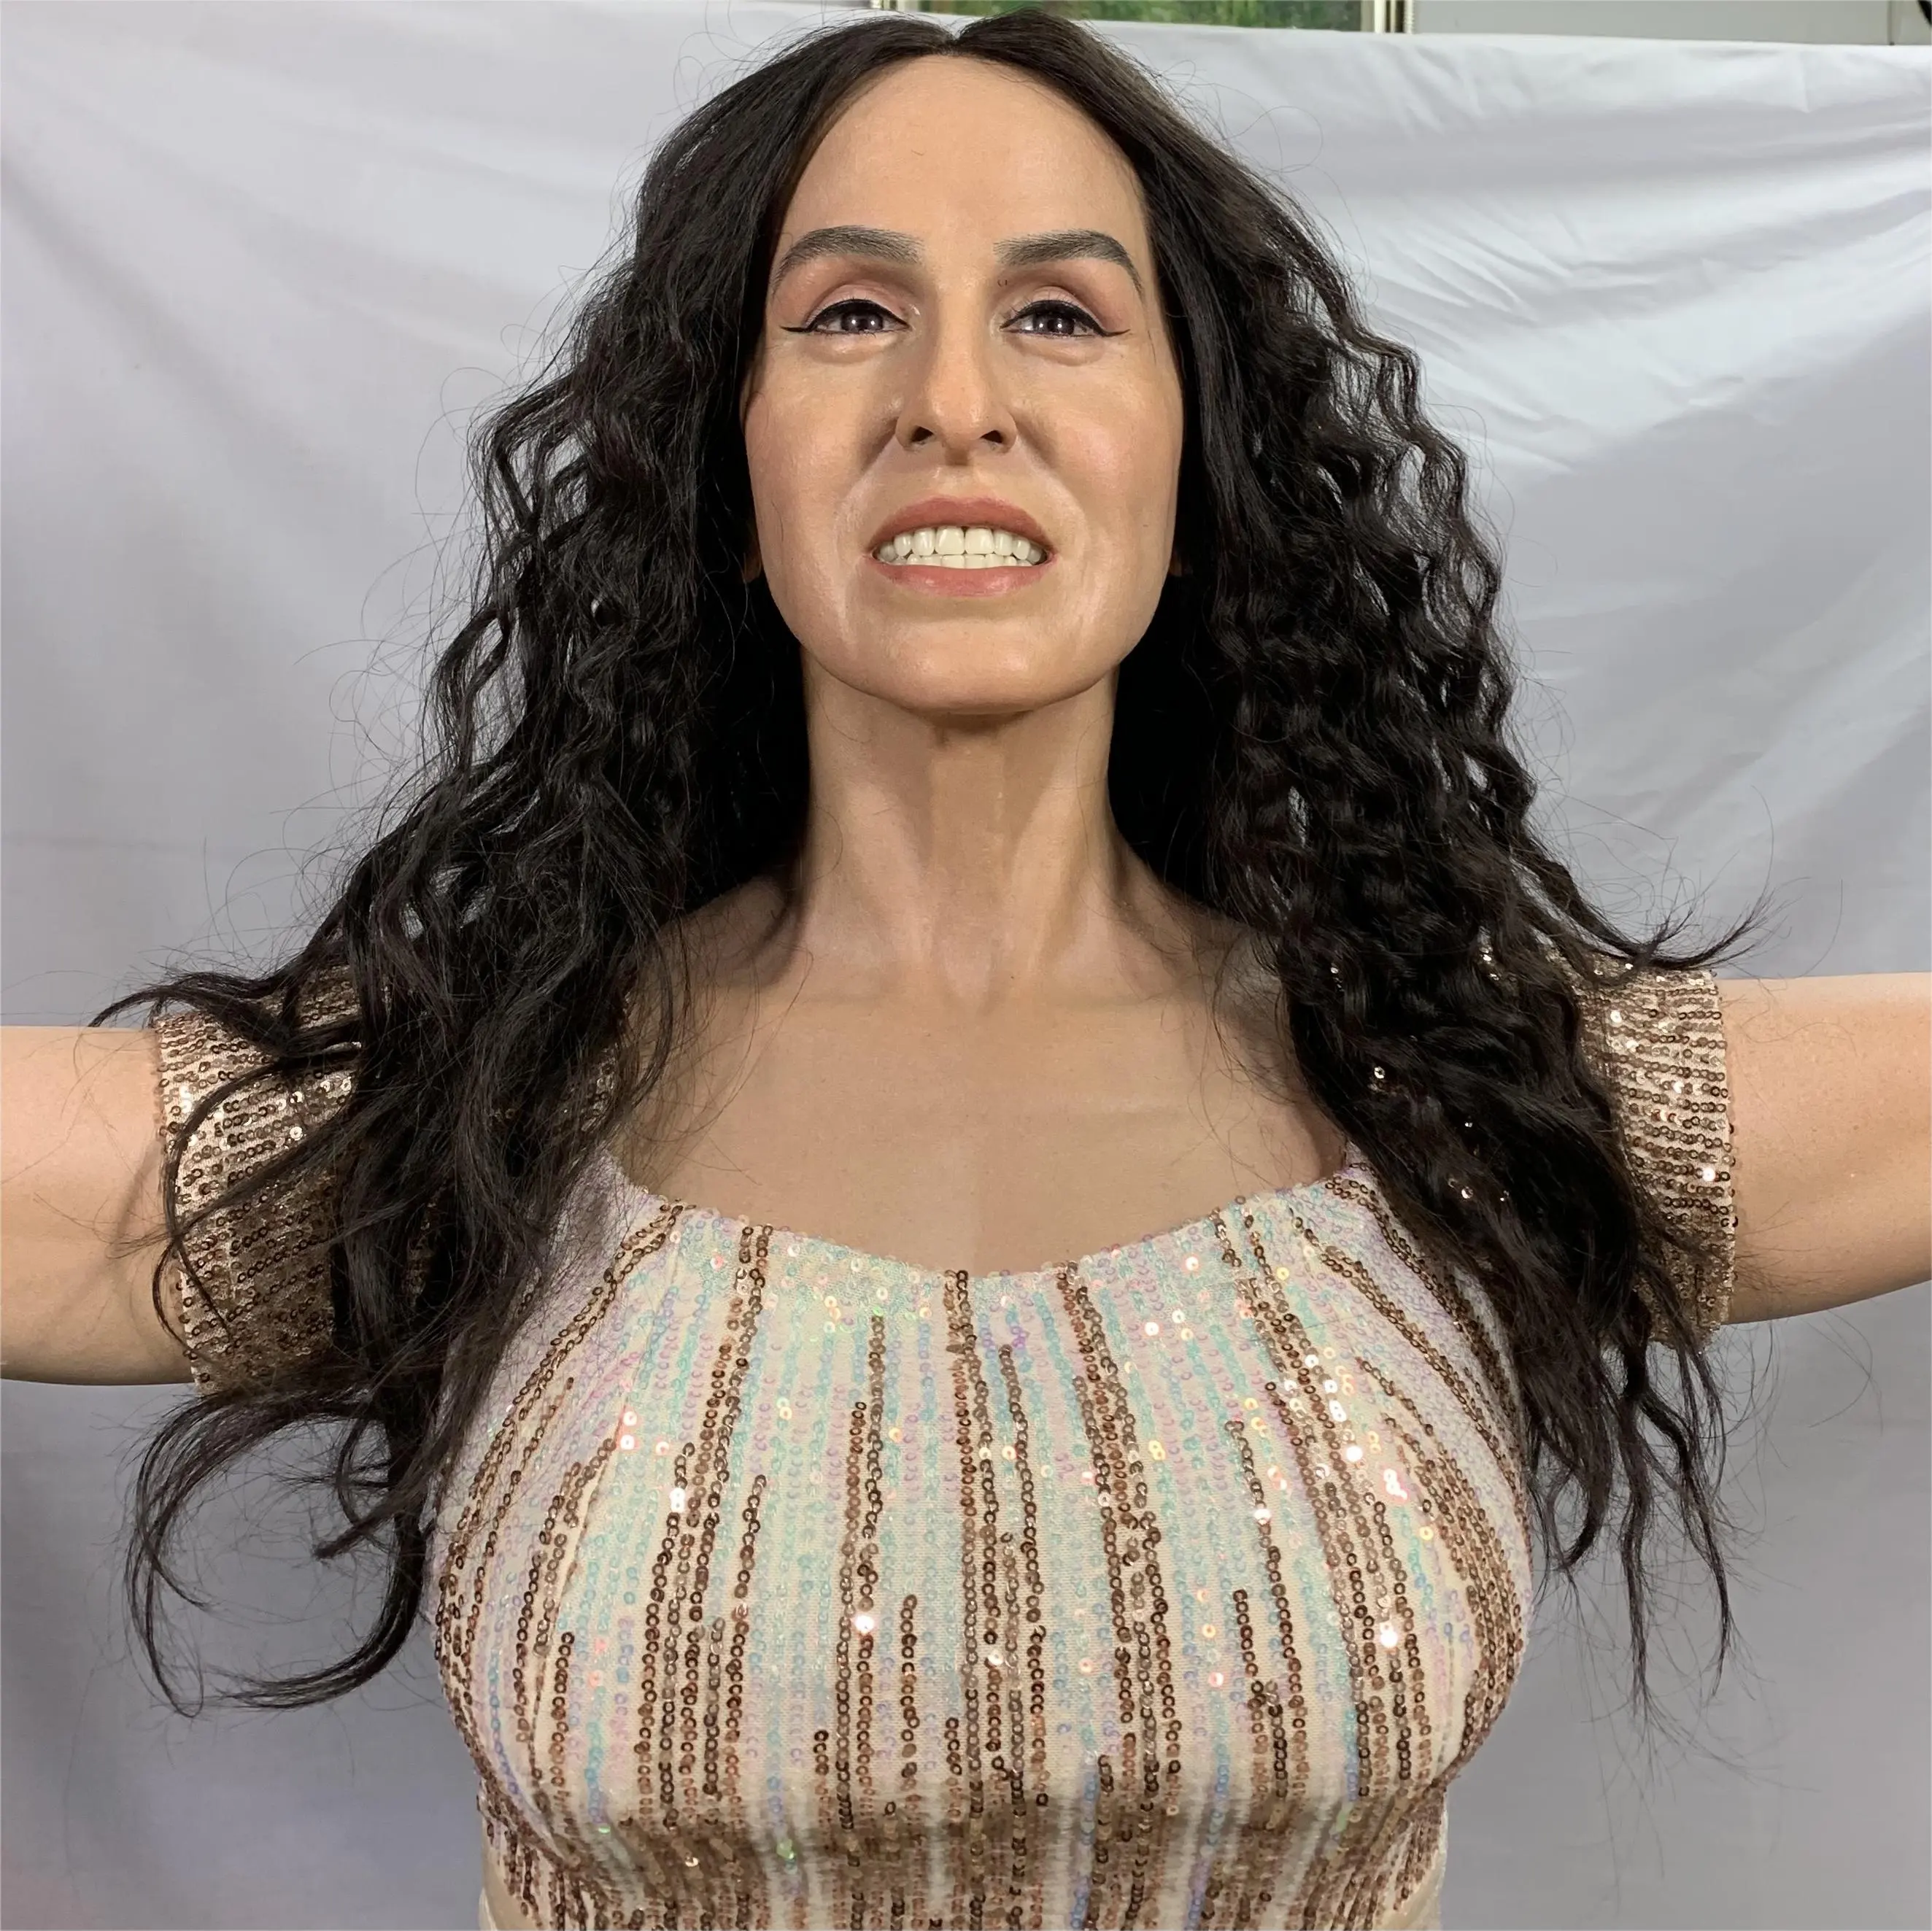 2022 New hyper realistic life size wax figure sculpture, wax mannequin, wax statue life size for all worldwide figure collectors